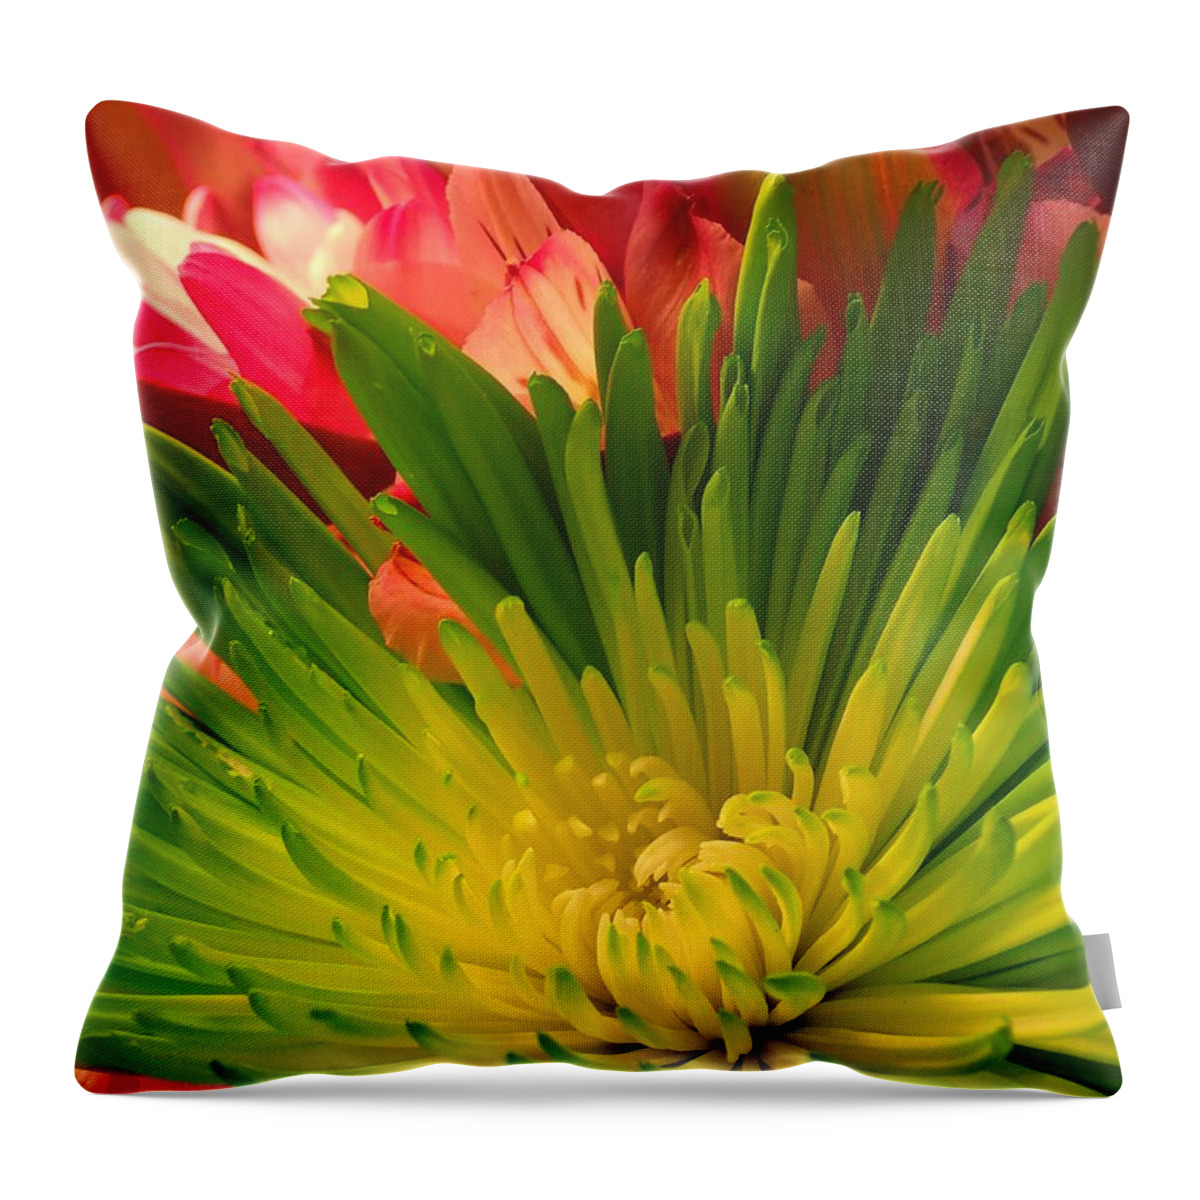 Flower Throw Pillow featuring the photograph Green Focus by Christina Verdgeline